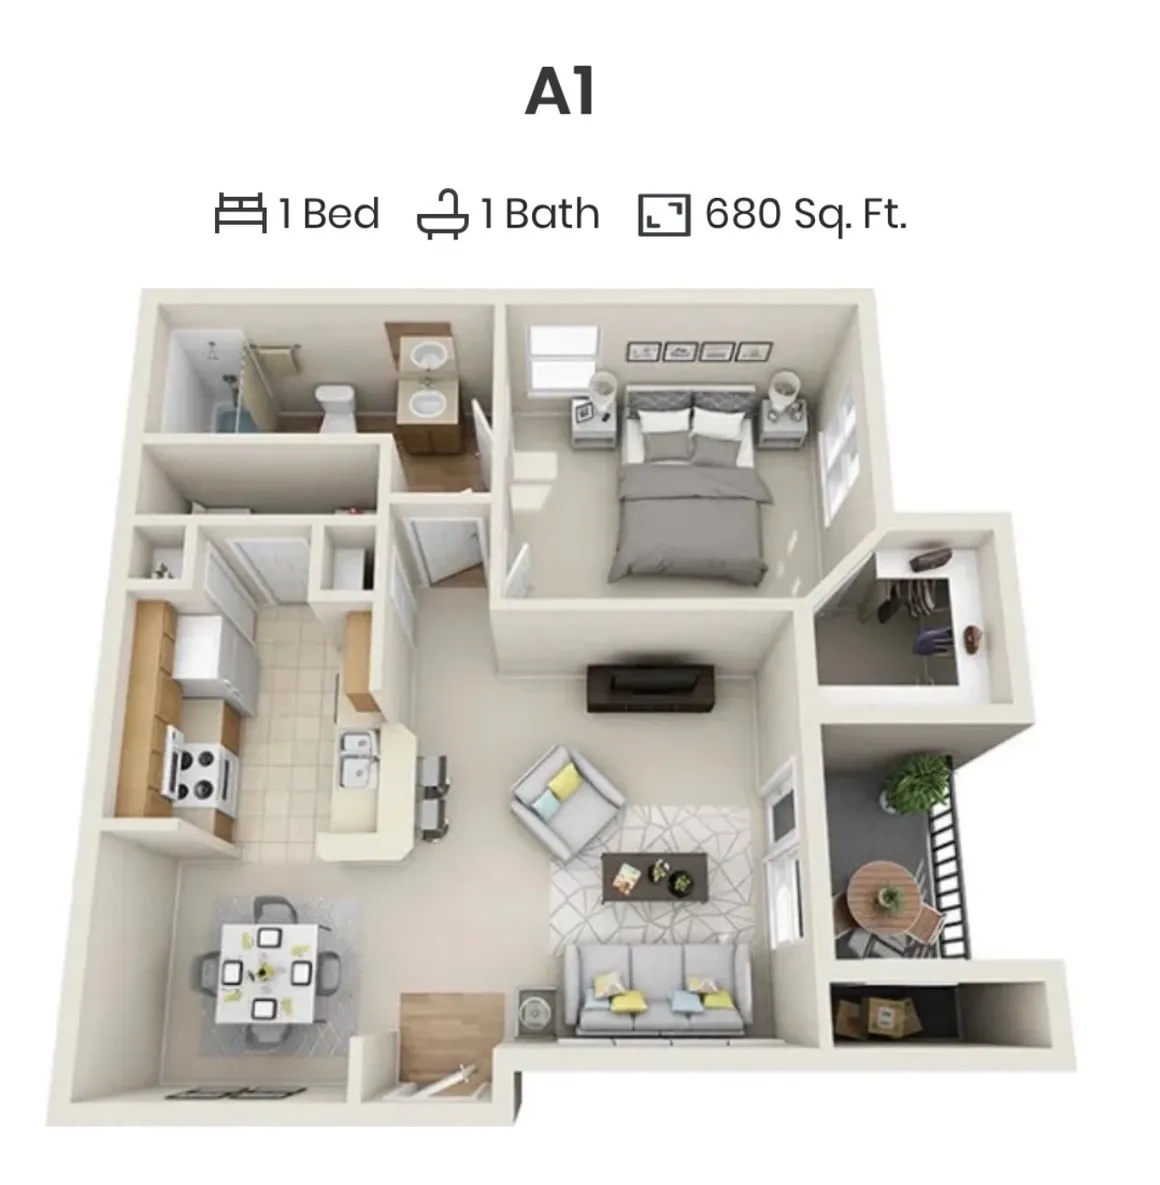 A 1 floor plan at the reserve apartments